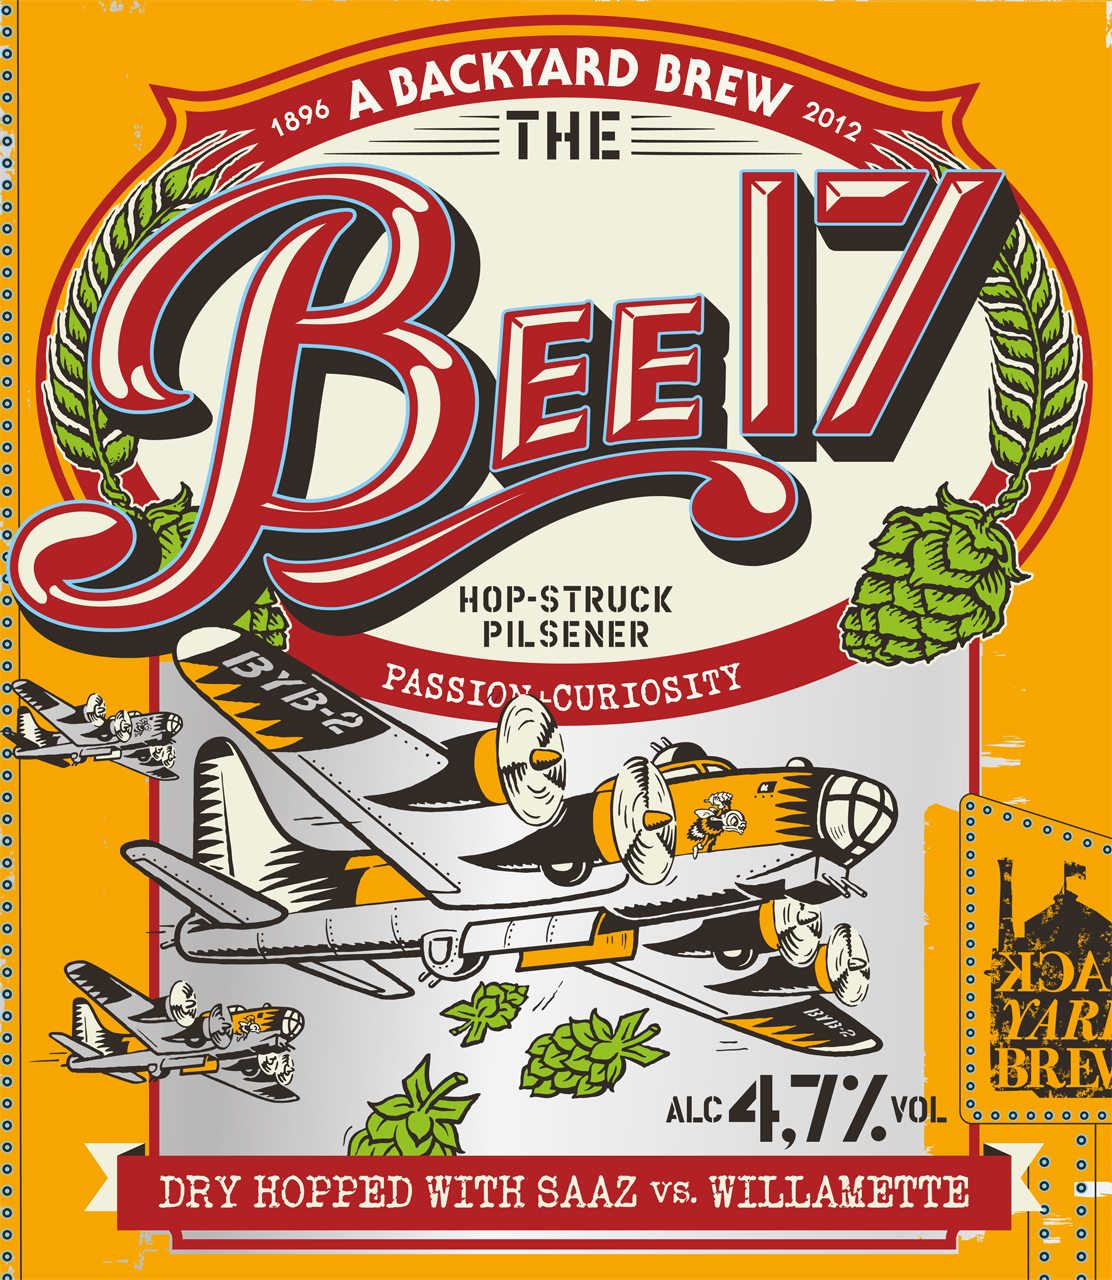 Illustration for a beer label with a B 17 bomber